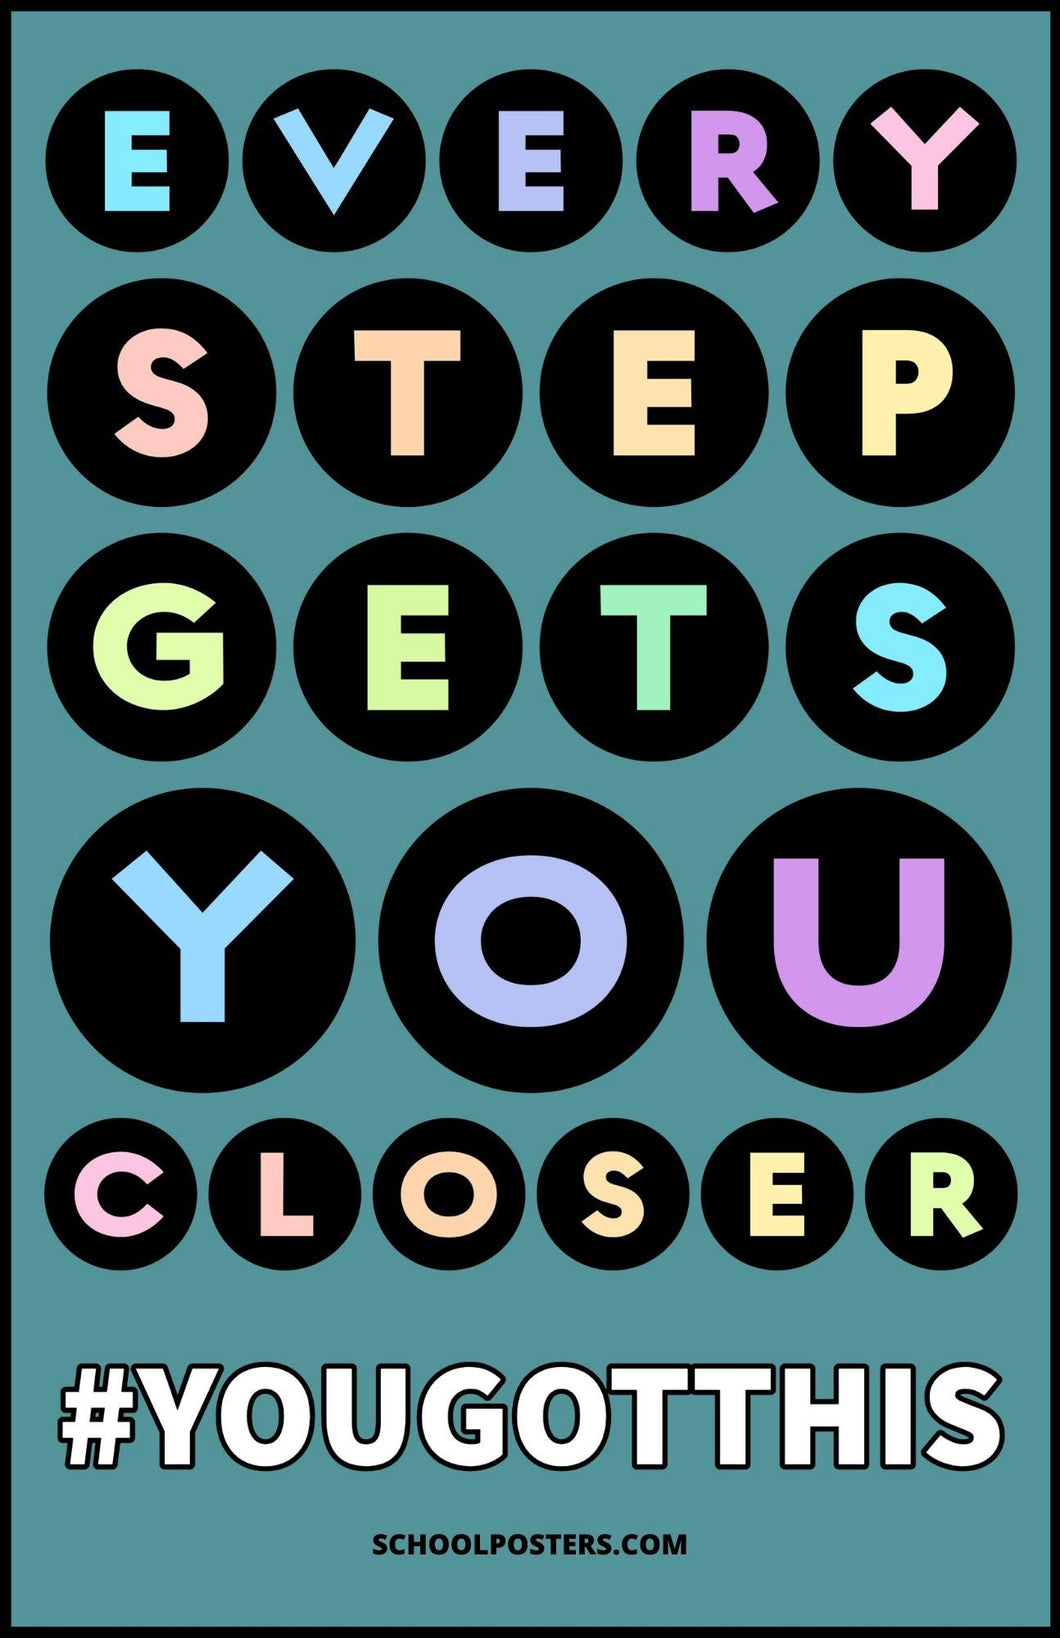 Every Step Gets You Closer Poster